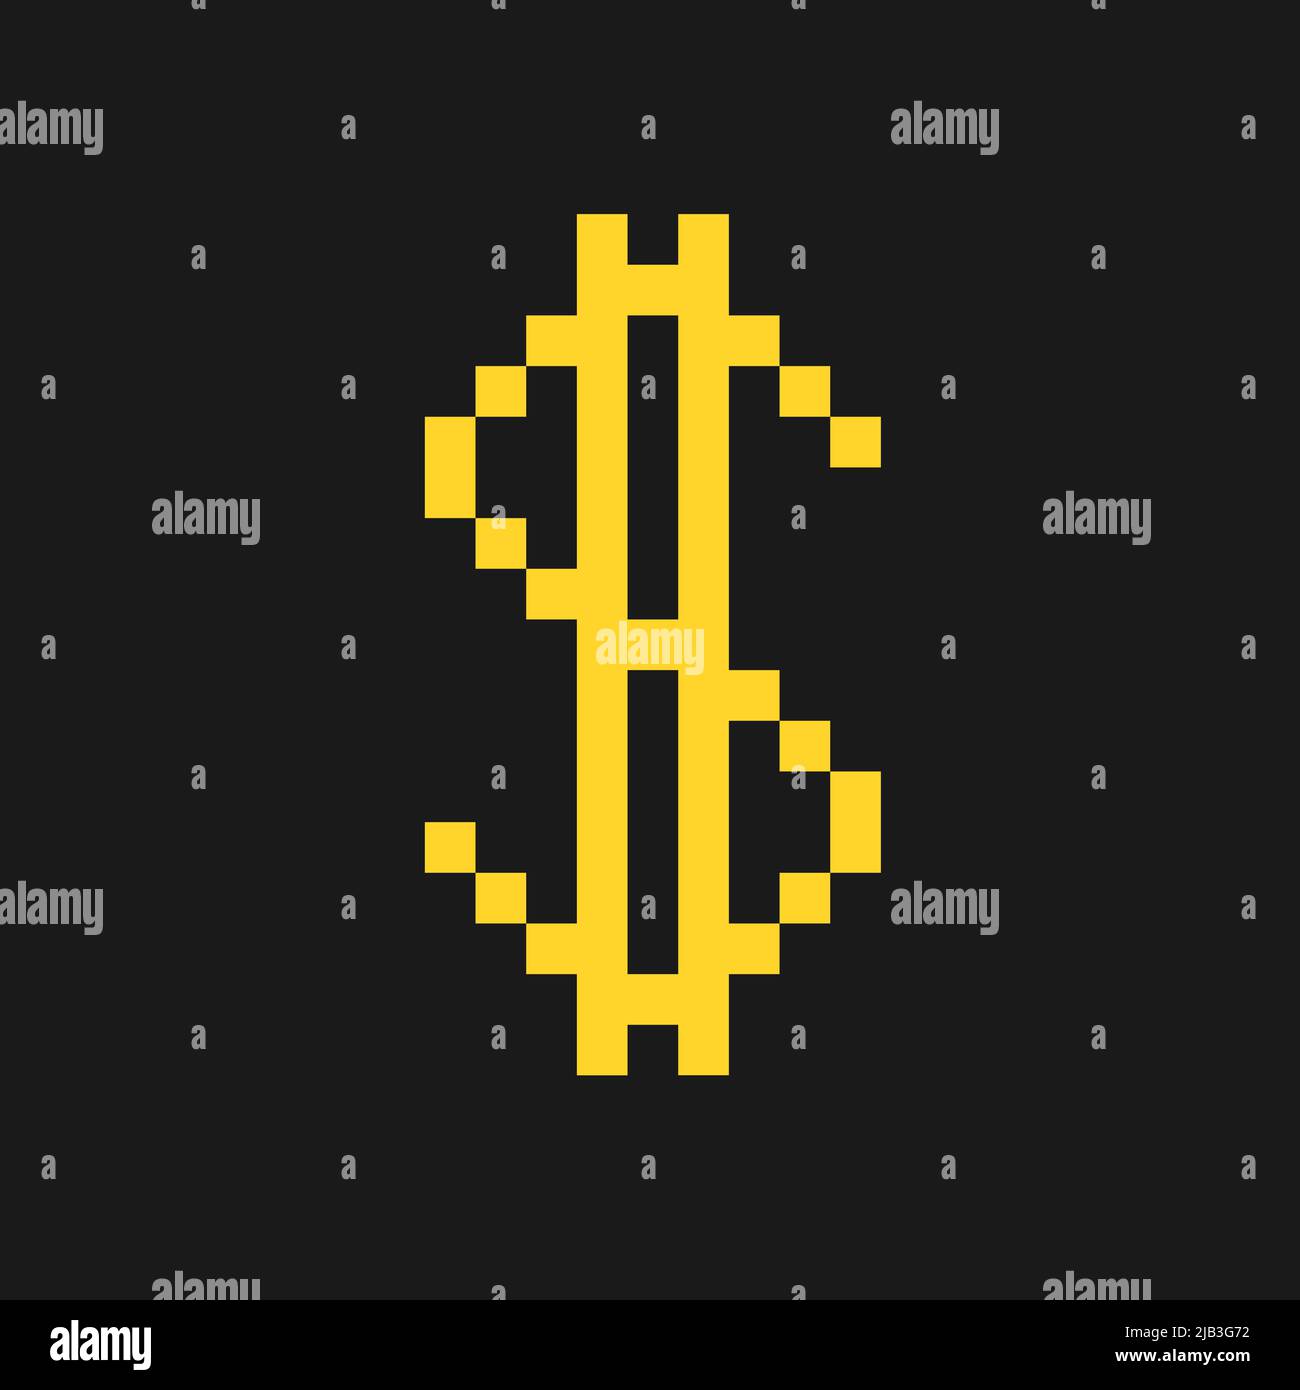 Digital US dollar - pixelated symbol as metaphor of fiat currency as virtual cryptocurrency and crypto. Vector illustration isolated on plain black ba Stock Photo